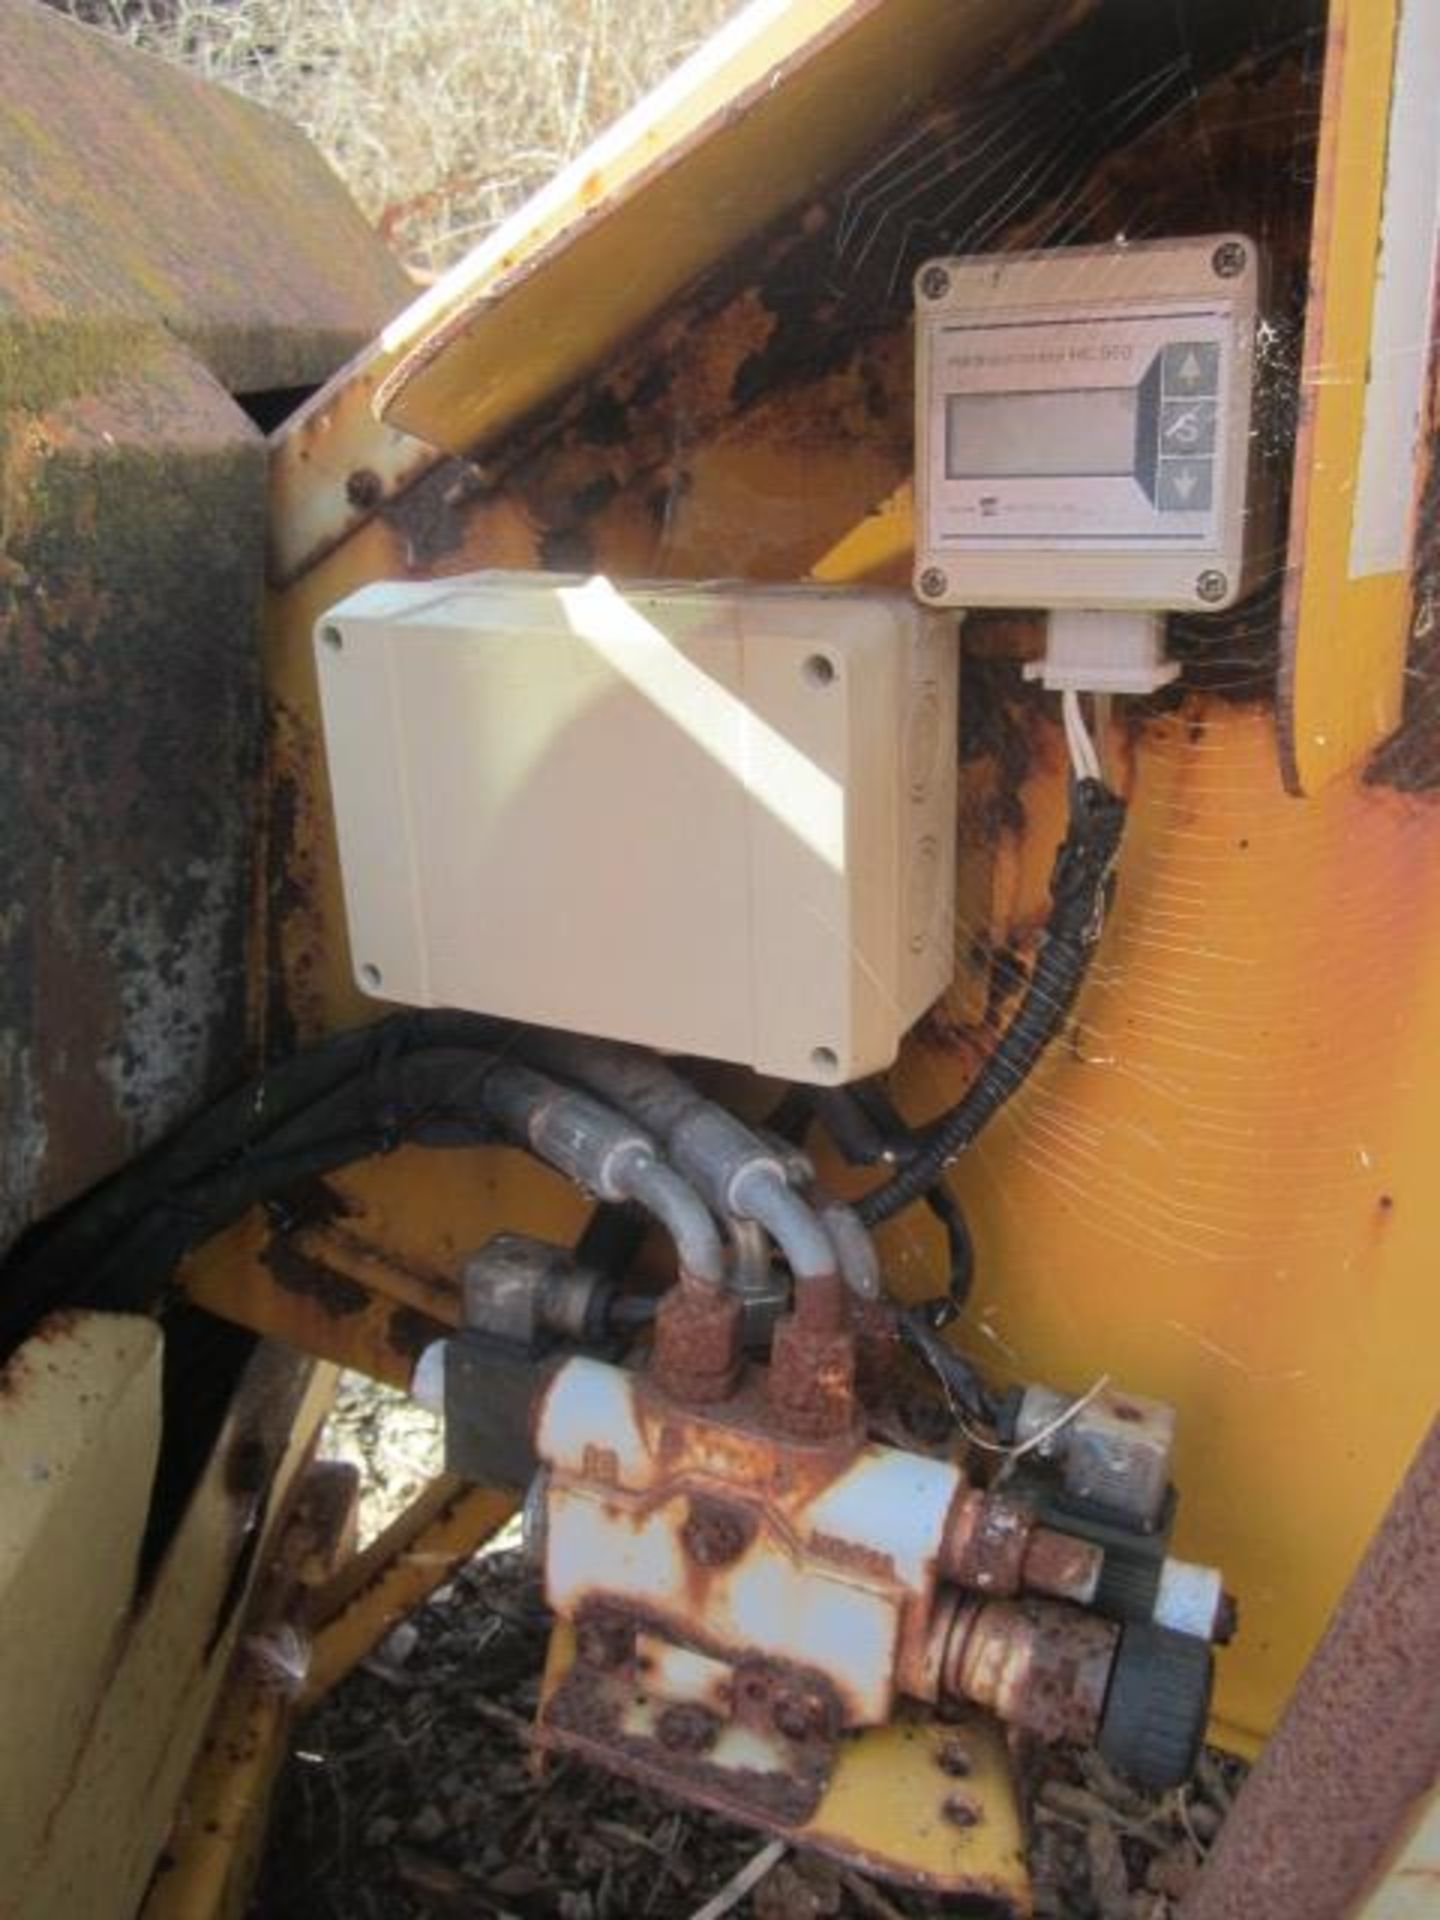 Schlesinger 3 point PTO chipper, model 330ZX, serial number 6938 (2001) - working condition unknown - Image 7 of 8